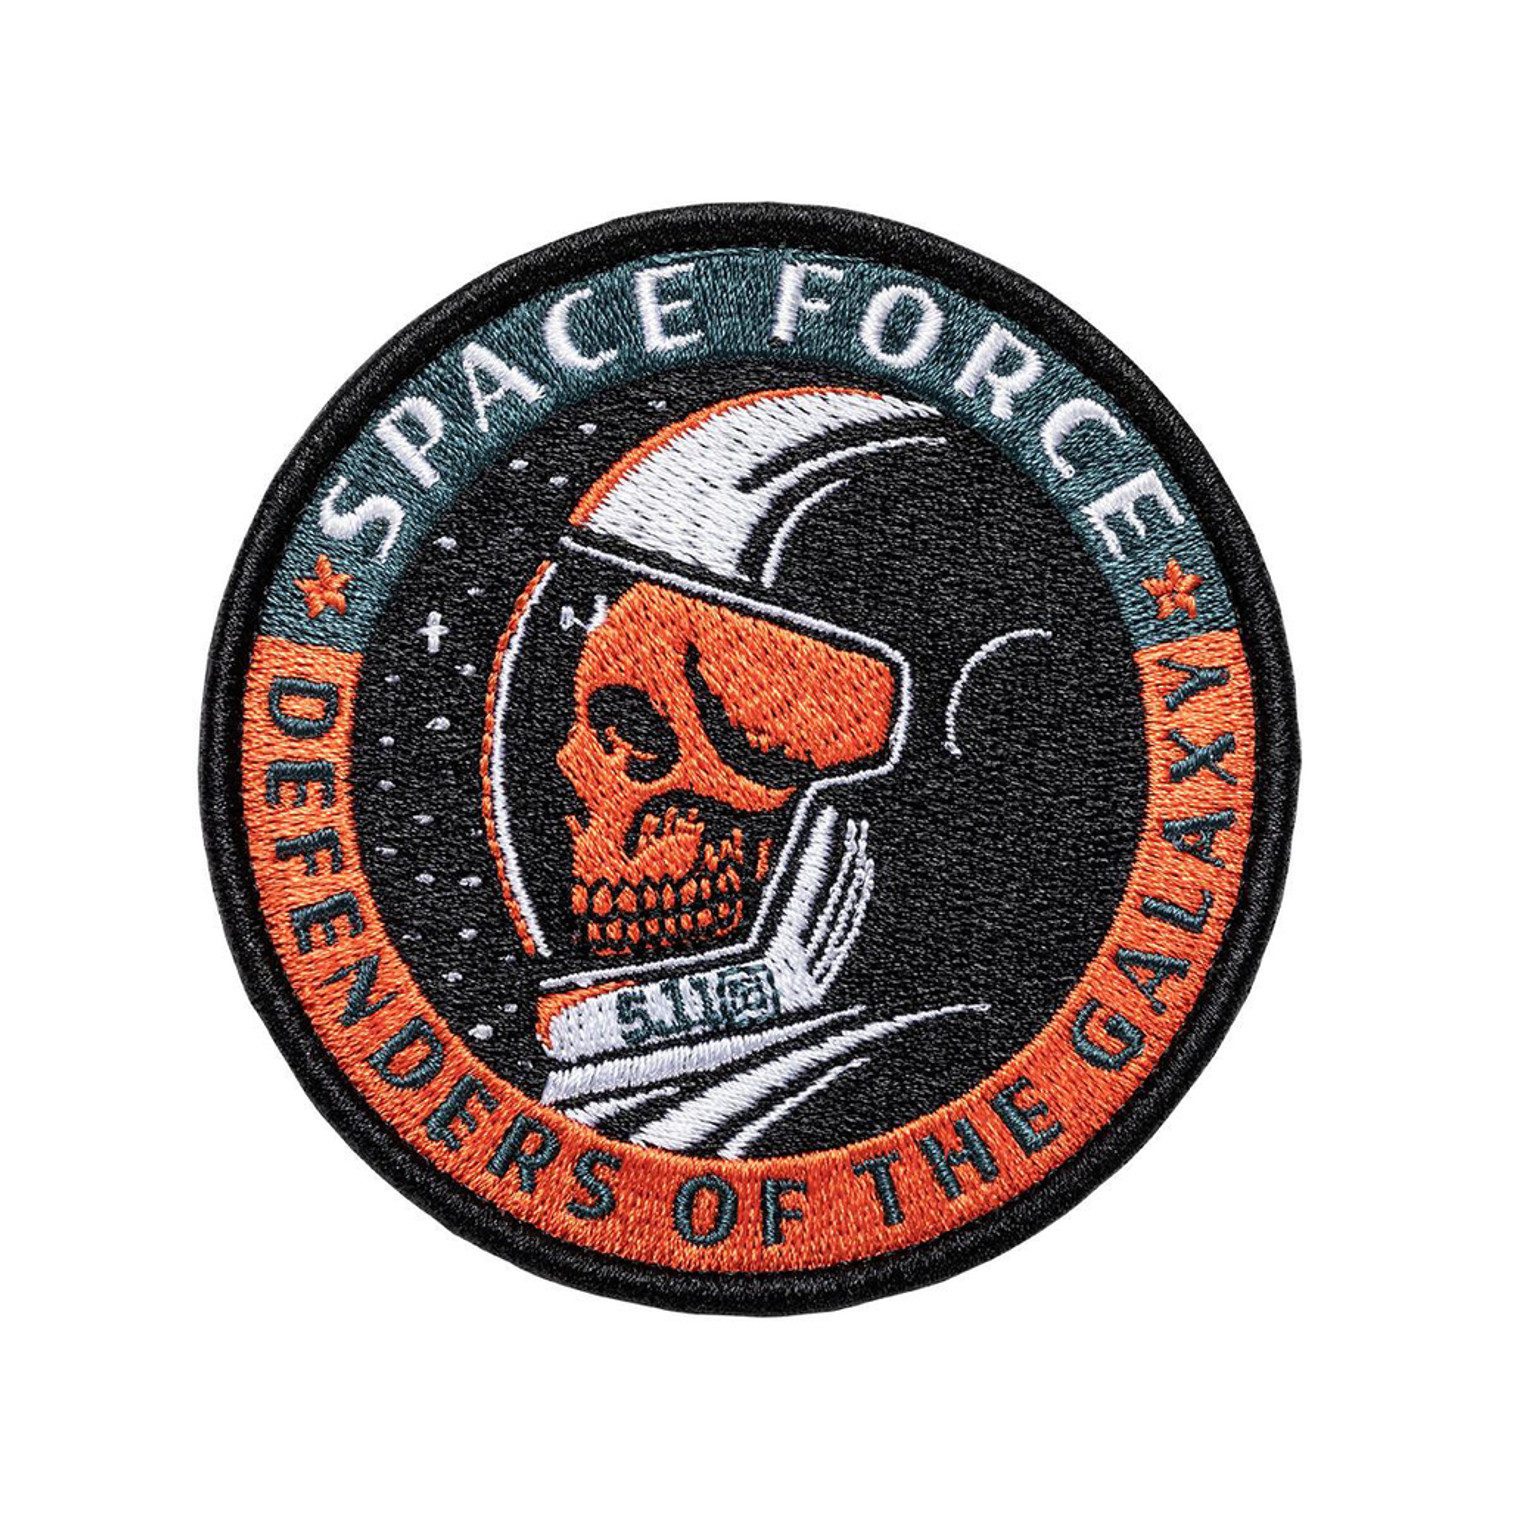 5.11 Tactical "Space Force" Hook & Loop Embroidered Morale Patch